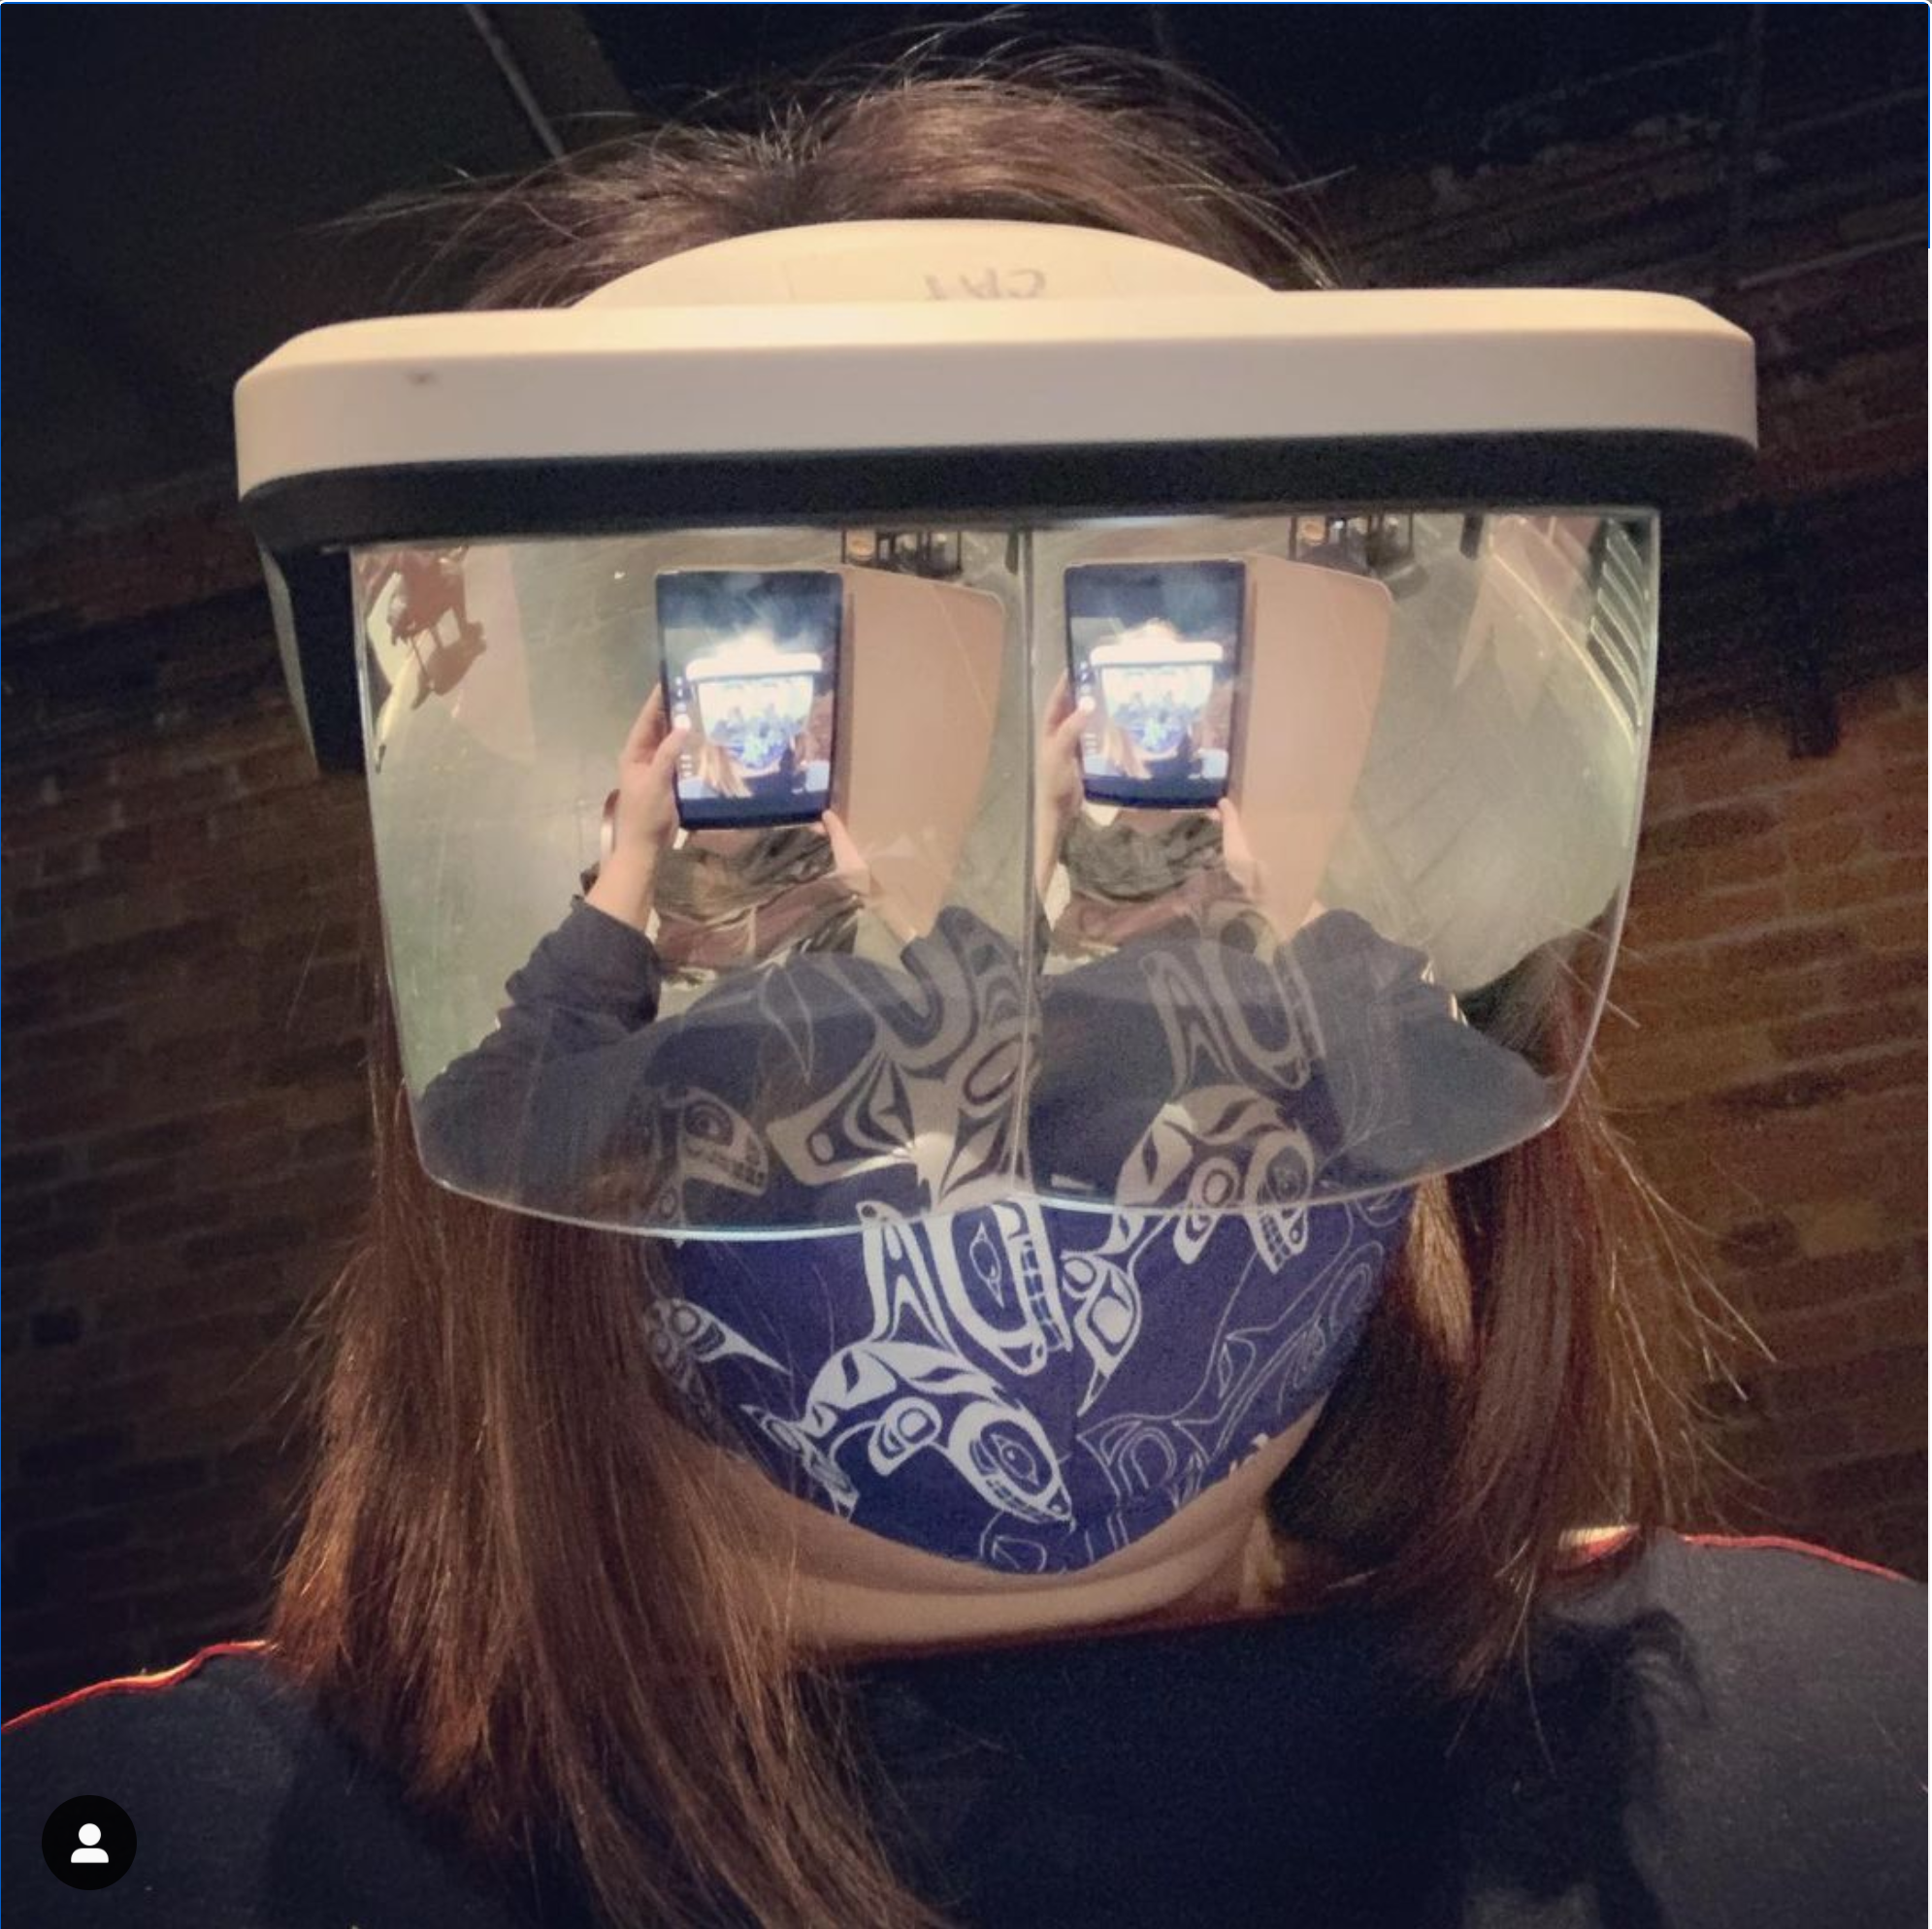 A technician wears a VR headset with reflective lenses while looking at a mobile device. The reflection of the device is visible on the visor forming a video loop.